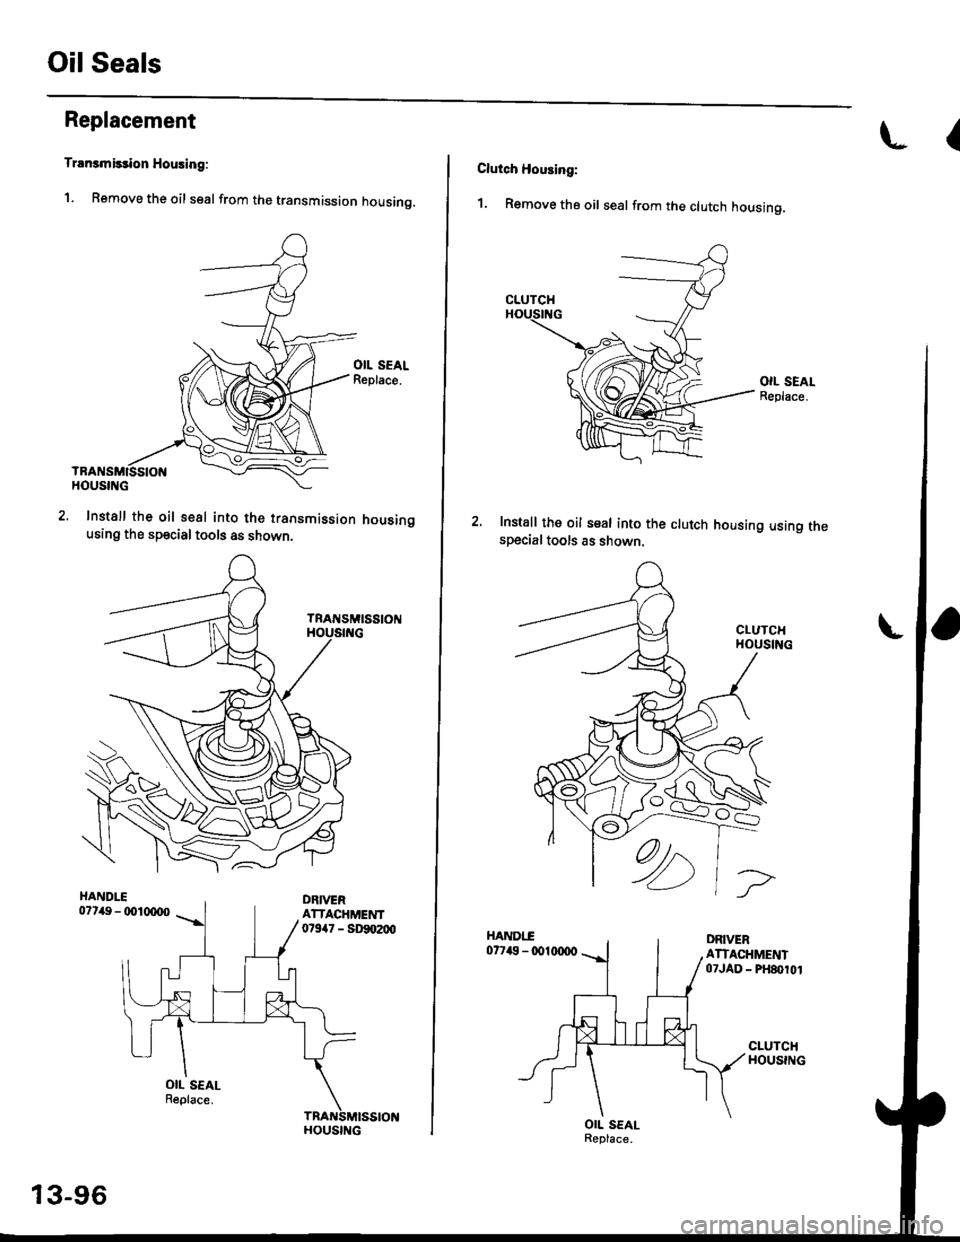 HONDA CIVIC 1996 6.G User Guide Oil Seals
Replacement
Trrn3mirdon Housing:
1. Remove the oil seal from the transmission housing.
Install the oil seal into the transmission housingusing the sp€cial tools as shown,
HANDLE07149 - d)l